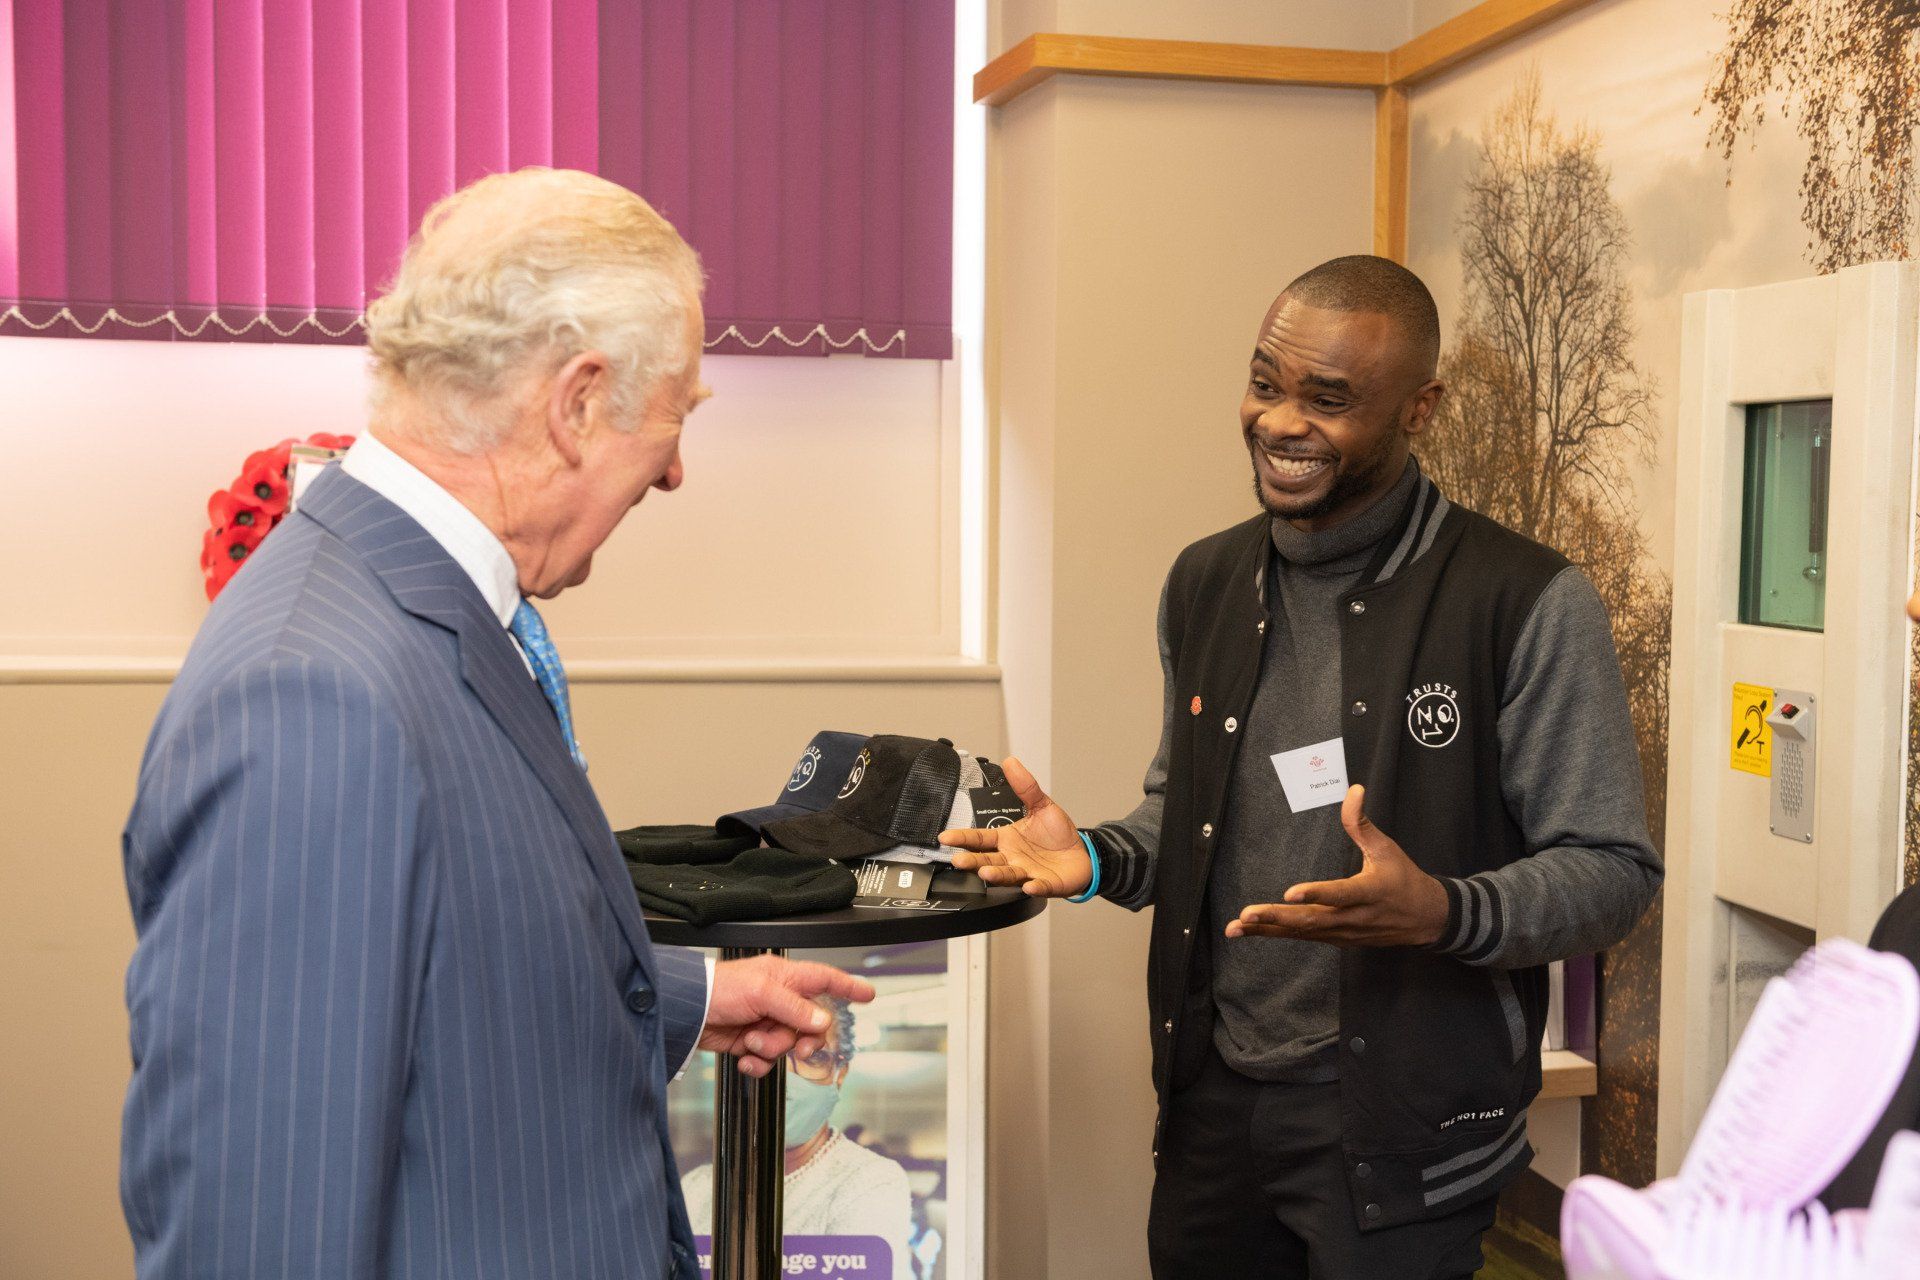 Sharing a laugh with HRH Prince Charles